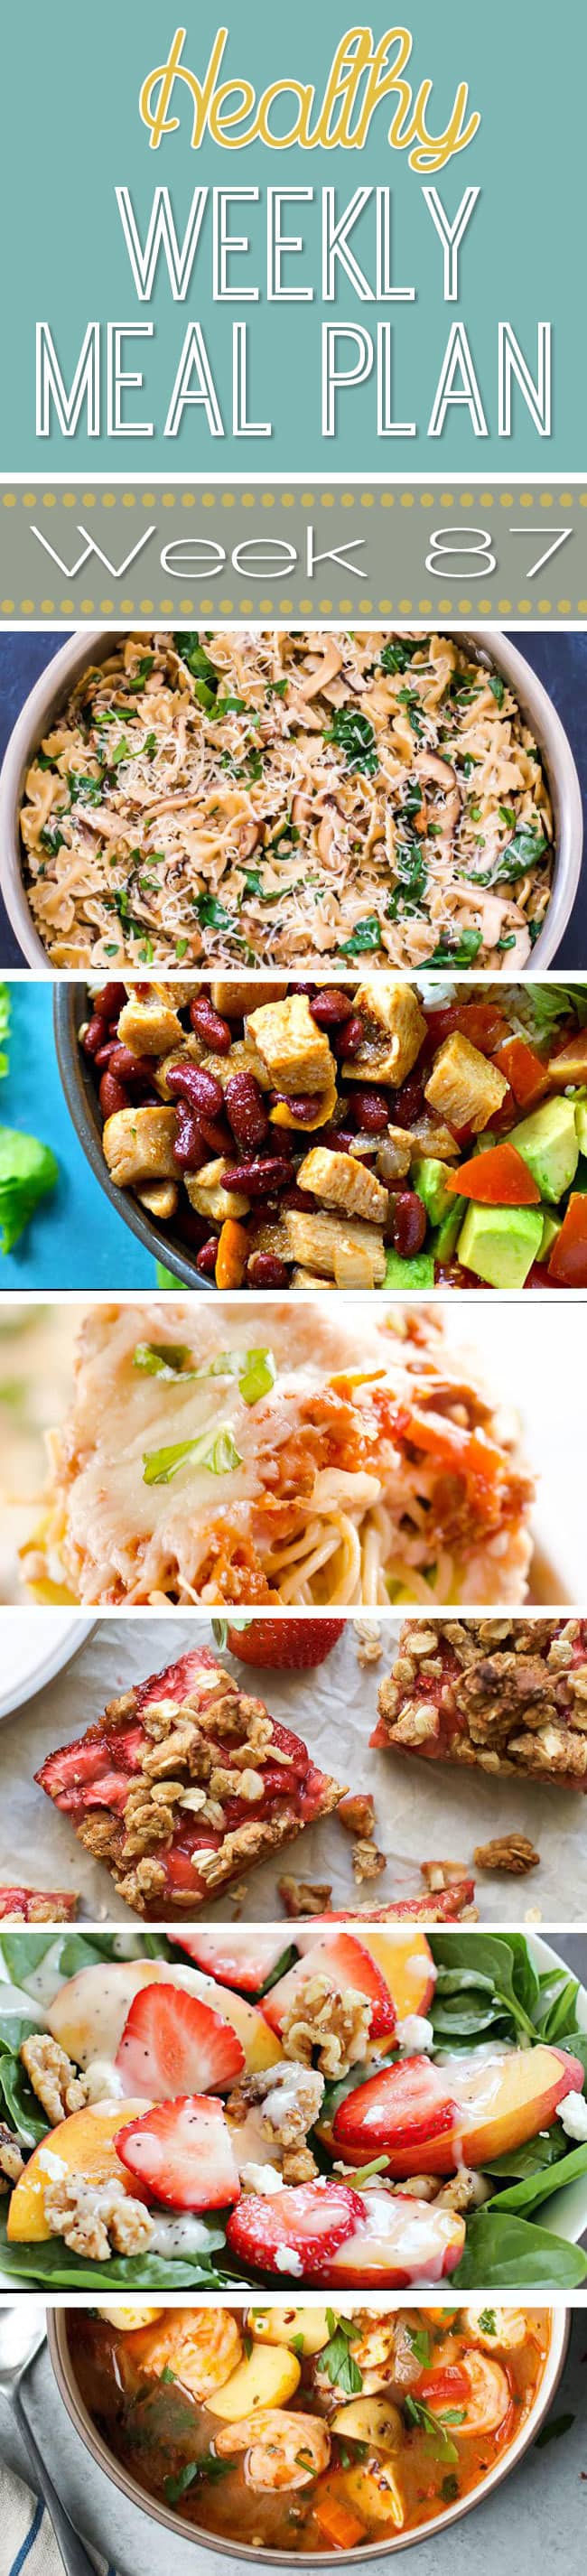 Healthy Weekly Meal Plan #87 is the perfect way to plan out your healthy recipes for the week! We have a healthy dinner recipe for every night of the week plus a healthy breakfast, lunch, side dish and dessert! Enjoy!